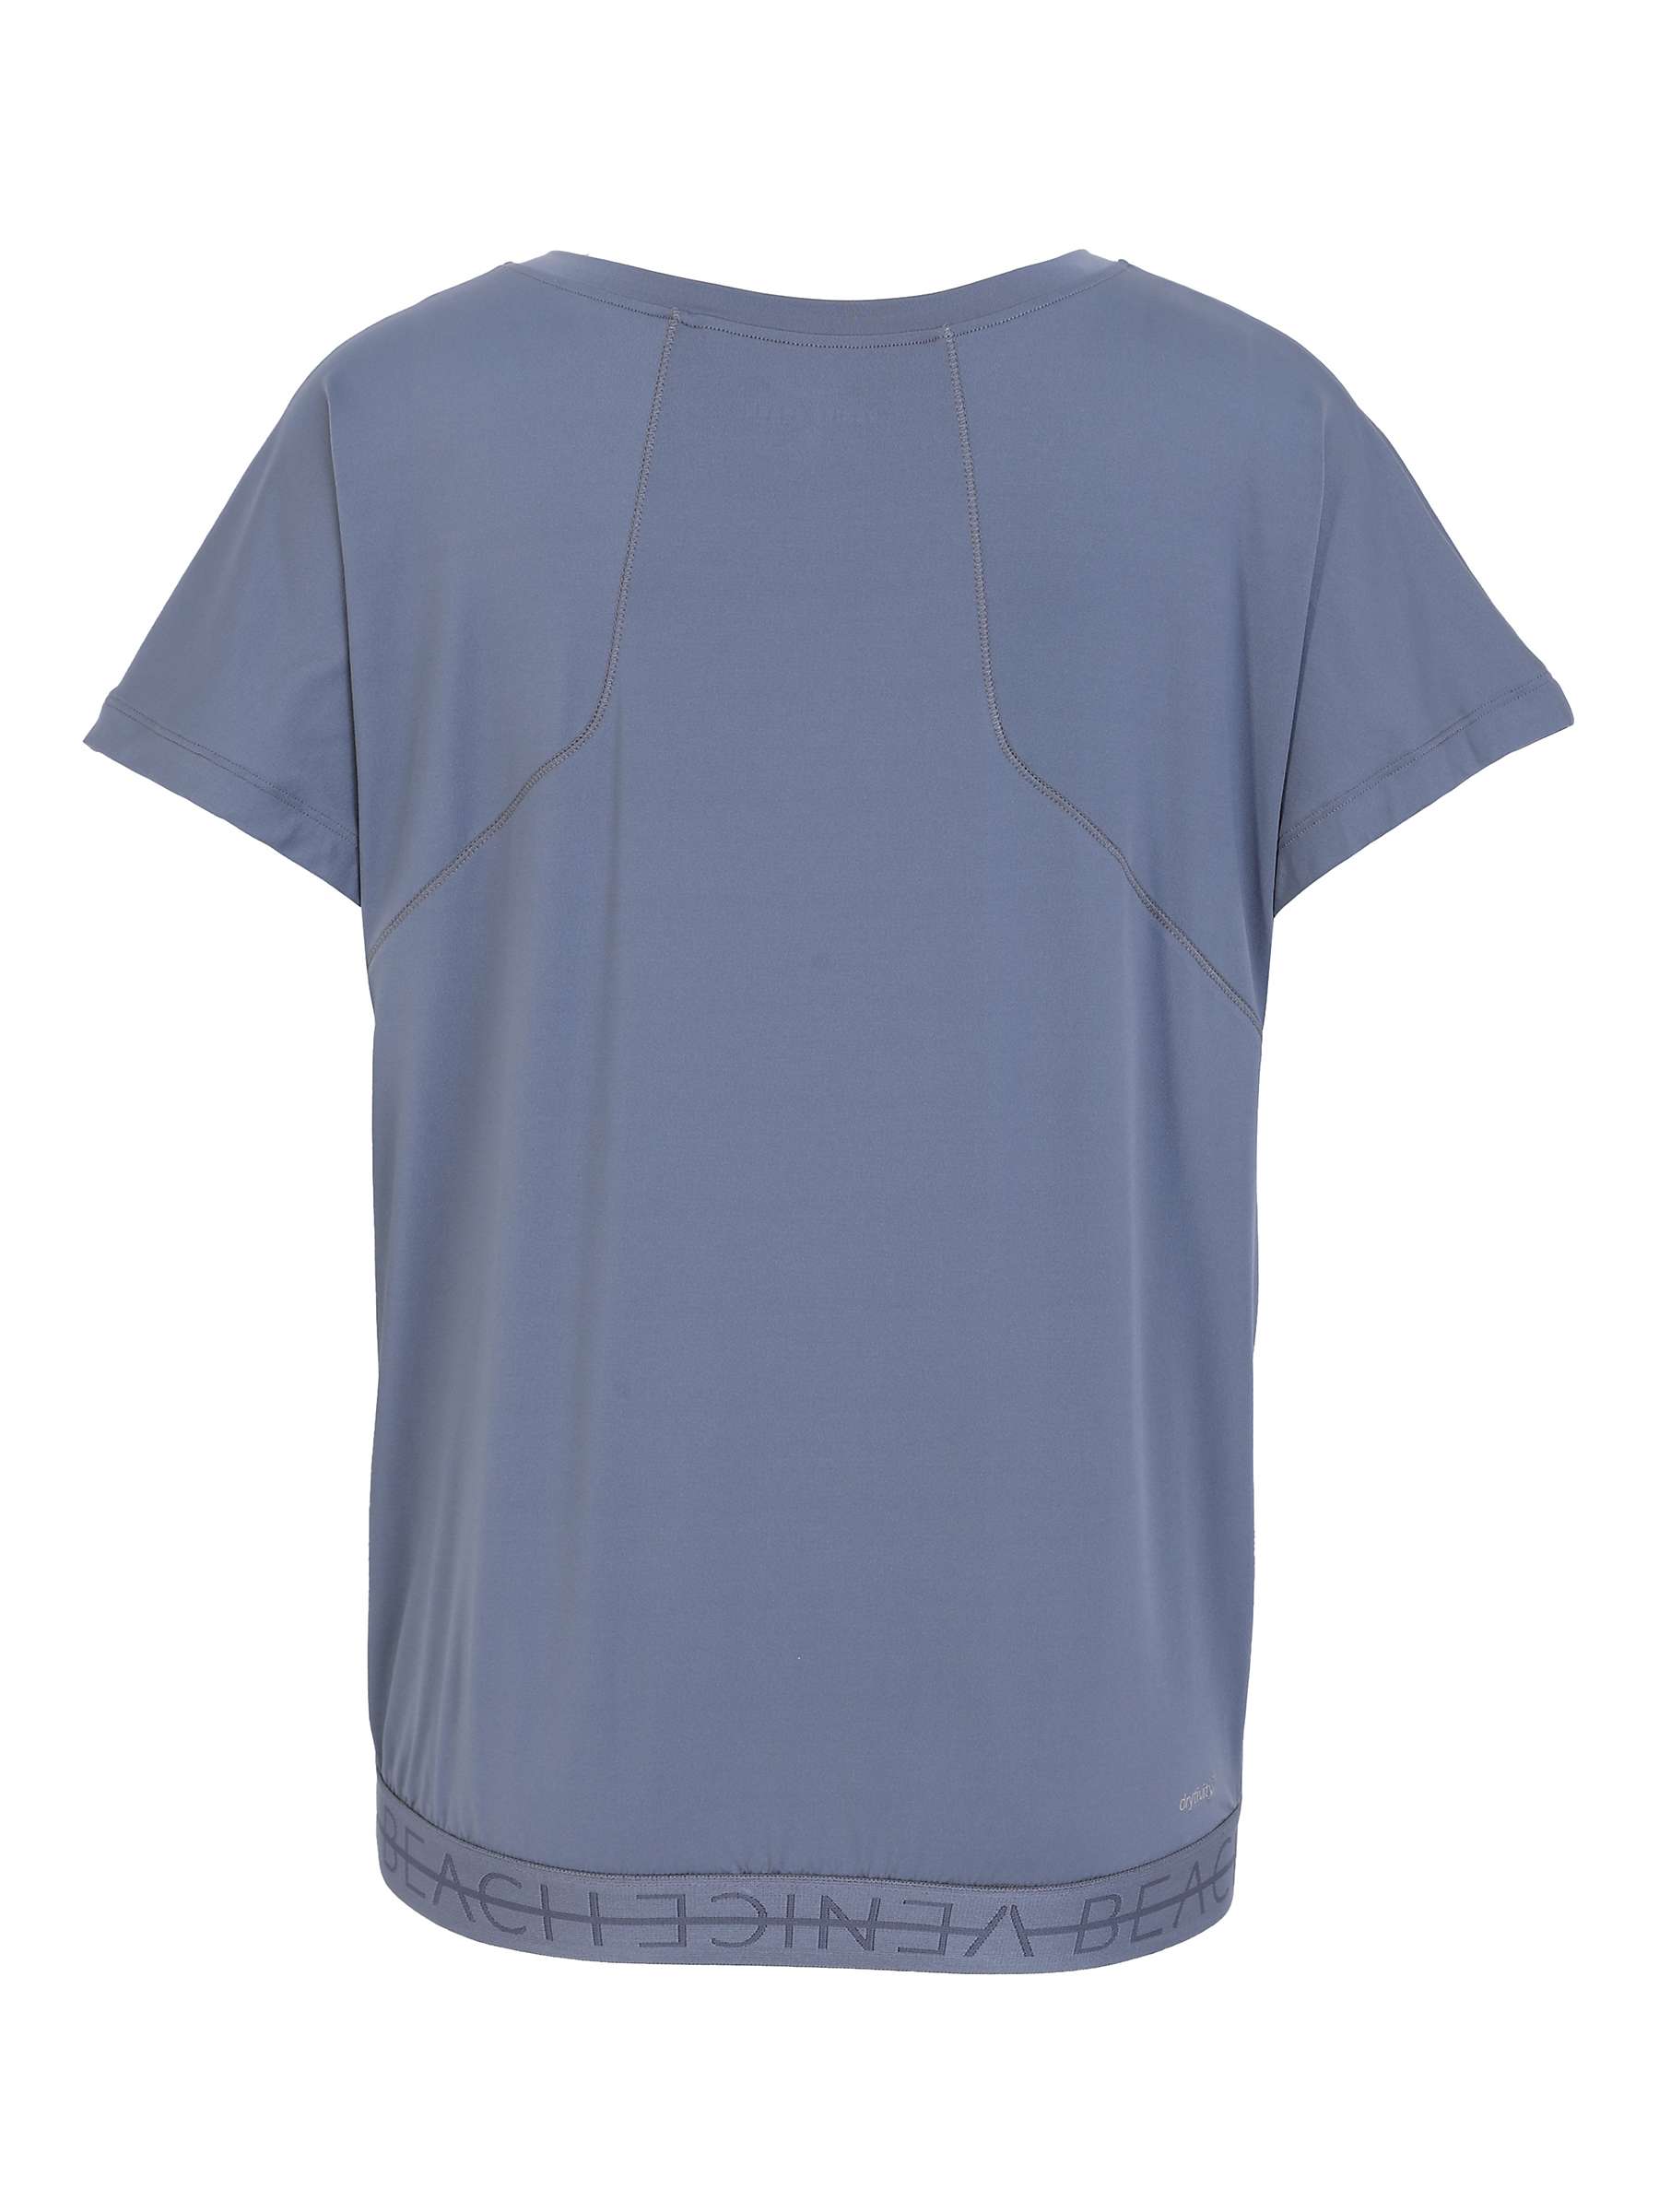 Buy Venice Beach Melodie V-Neck Training T-Shirt, Mirage Grey Online at johnlewis.com